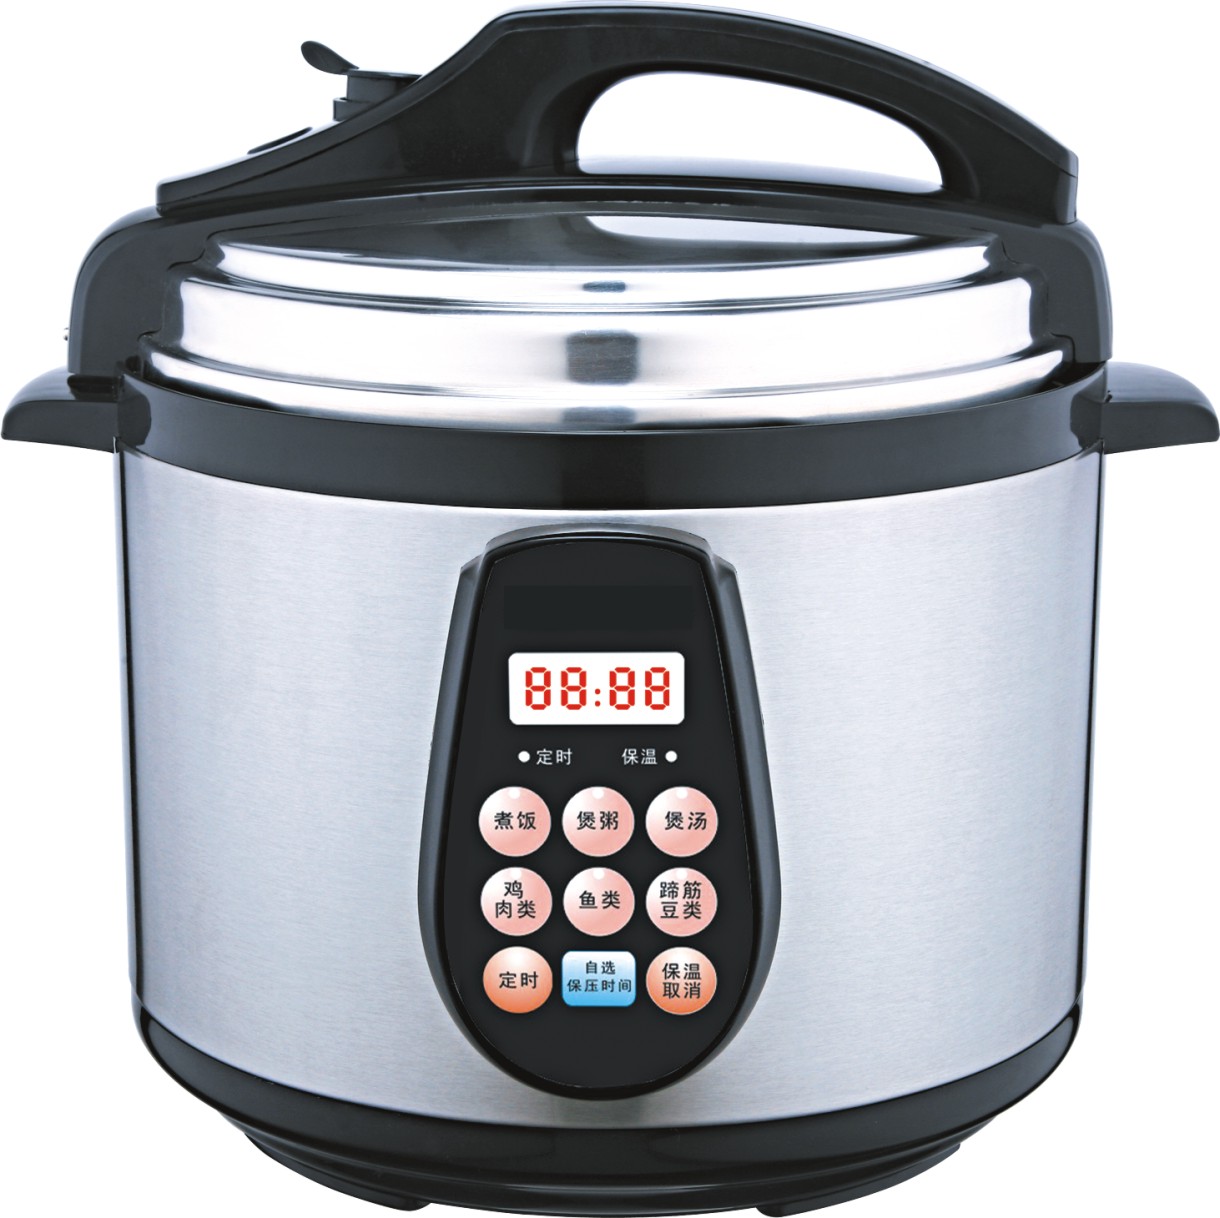 8 Safety protect durable fashionable electric rice cooker electric pressure cooker